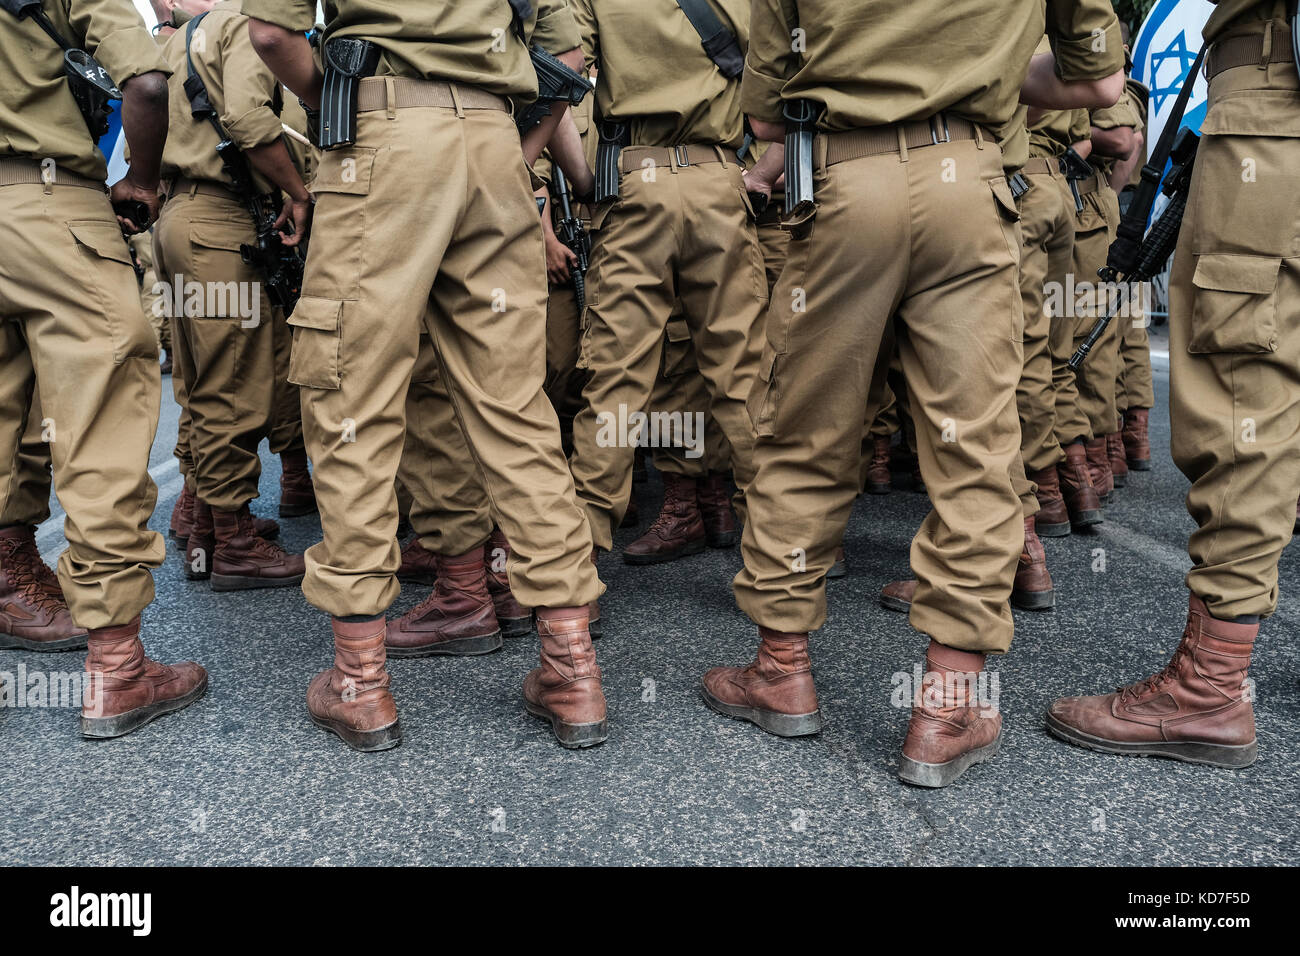 Jerusalem, Israel. 10th Oct, 2017. IDF soldiers from the Paratroopers Brigade, in their traditional red boots, join tens of thousands in the annual Jerusalem Parade including delegations from around the world, Israeli industry, banks, emergency and military personnel, in the tradition of Temple Mount pilgrimages on the holiday of Sukkoth and in a show of international support for Israel. Credit: Nir Alon/Alamy Live News Stock Photo